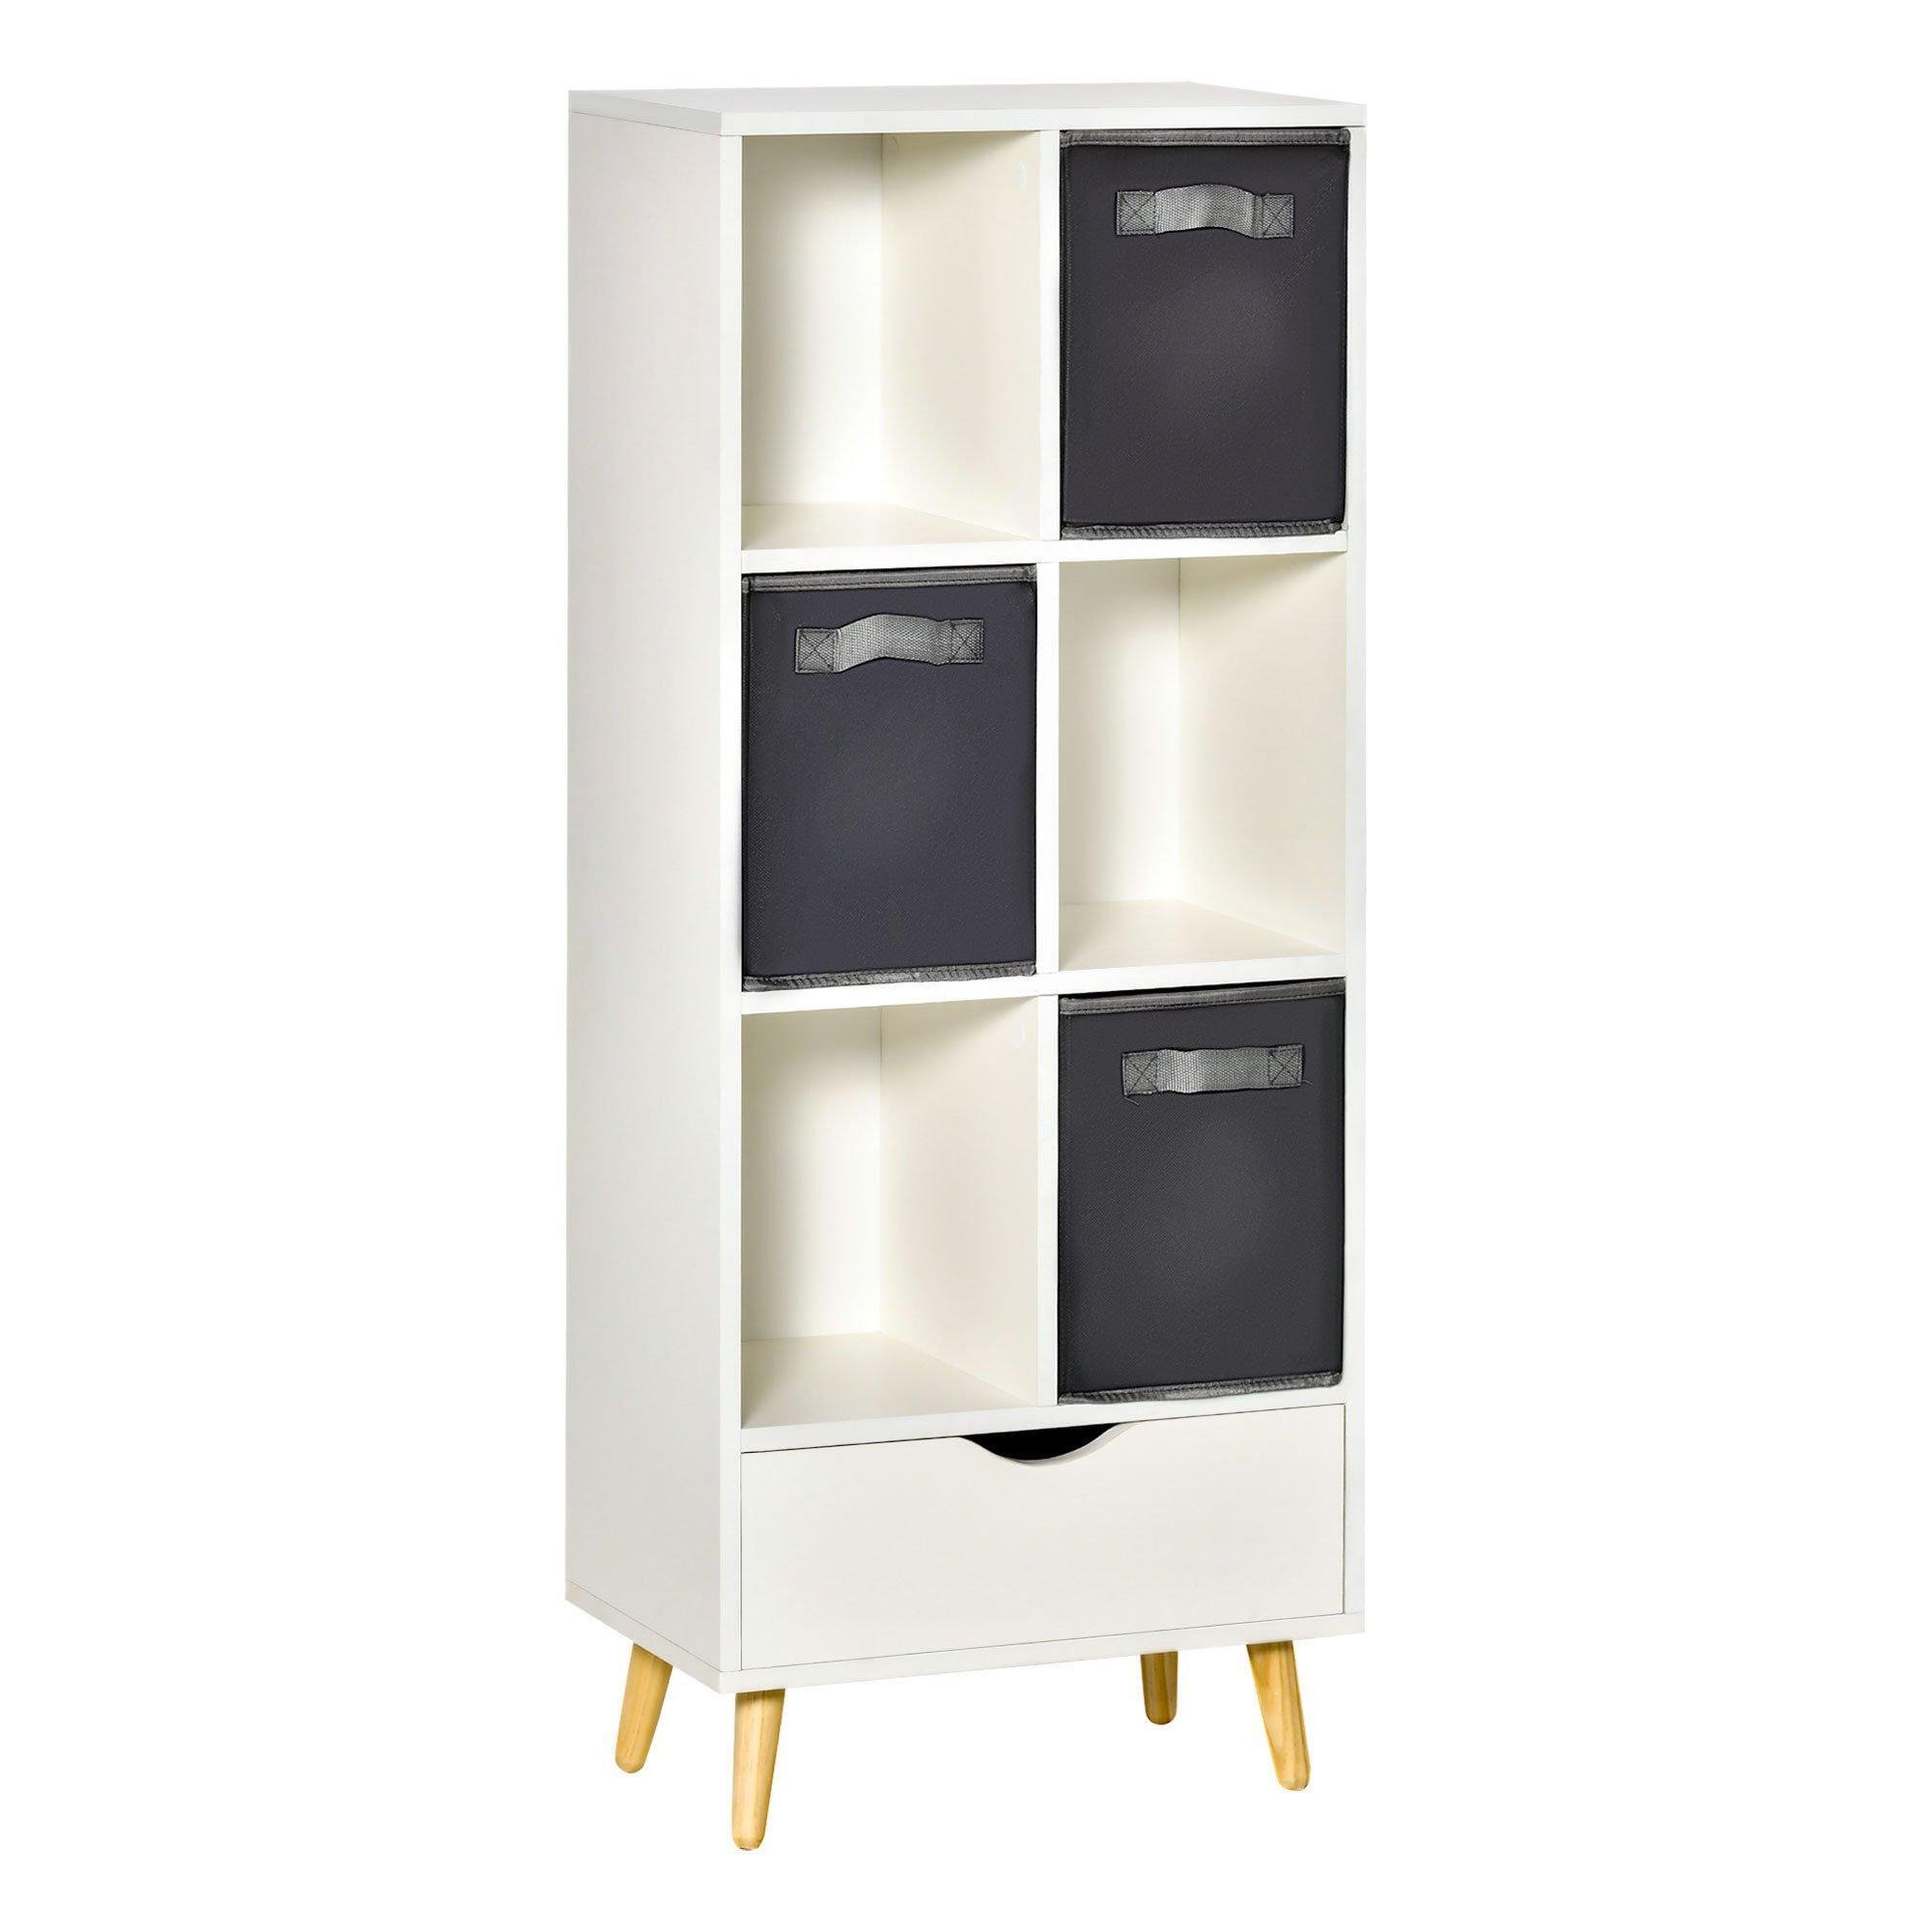 Modern Bookcase Storage Cabinets with Shelves for Home Office - image 1